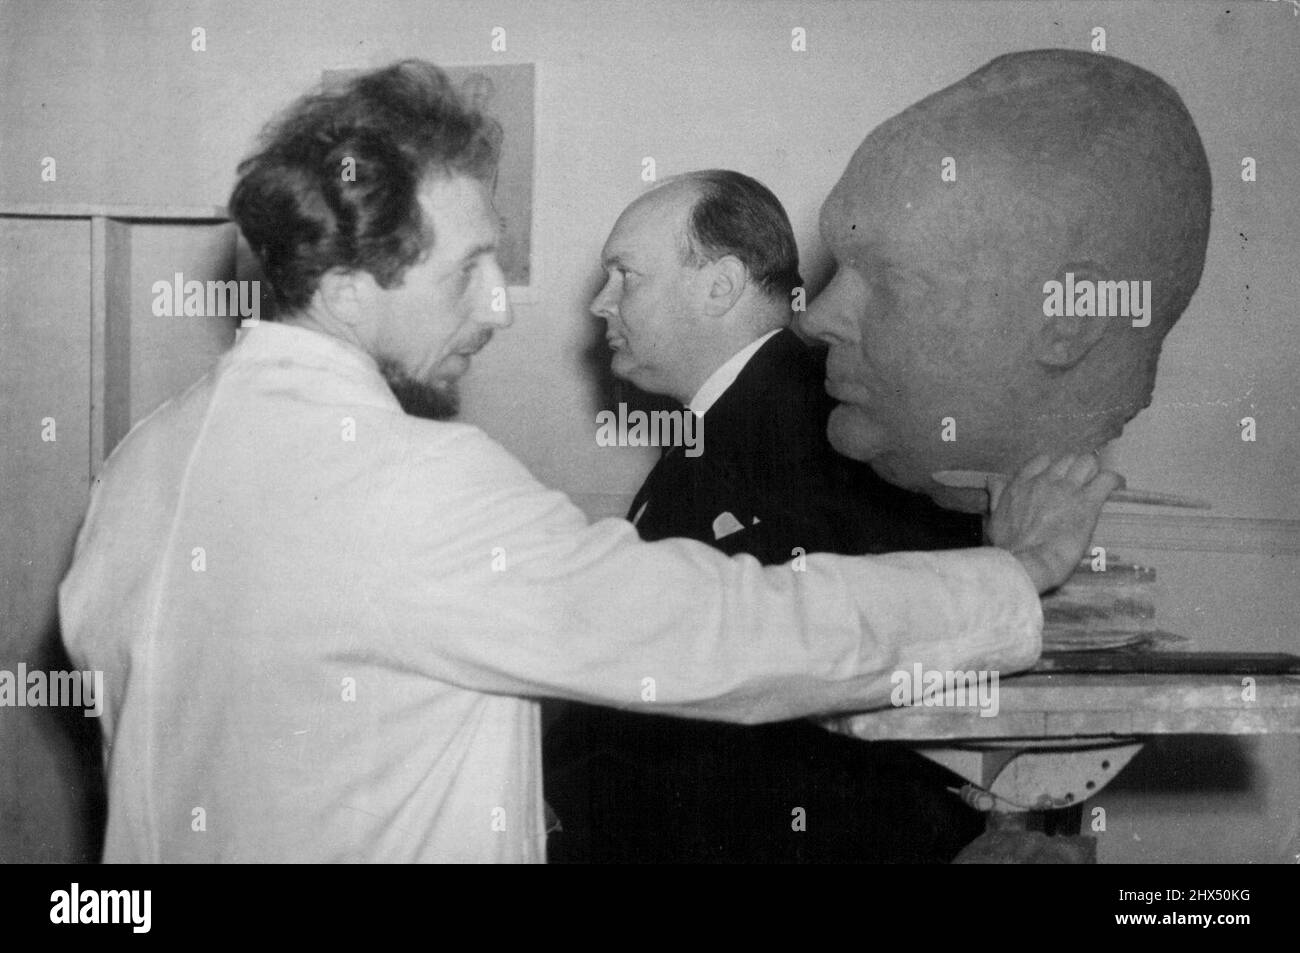 M. Spaak, First President Of U.N.O. Assembly-Poses For Sculptor In London -- M. P.H. Spaak, posing for Mr. Olam Nemon, who is putting the finishing touch to the clay model of the bust which will be carved in stone-in the sculptor's studio in Kensington, London.M. P.H. Spaak, first President of the United Nations Assembly and Belgian Foreign Minister, has been posing  Mr. Olam Nemon the Yugoslav sculptor, who is to crave a bust of the statement in stone. Most of the sittings, which are given in the sculptor's Kensington studio, have to take place at right, when M. Spaak has finished his work in Stock Photo